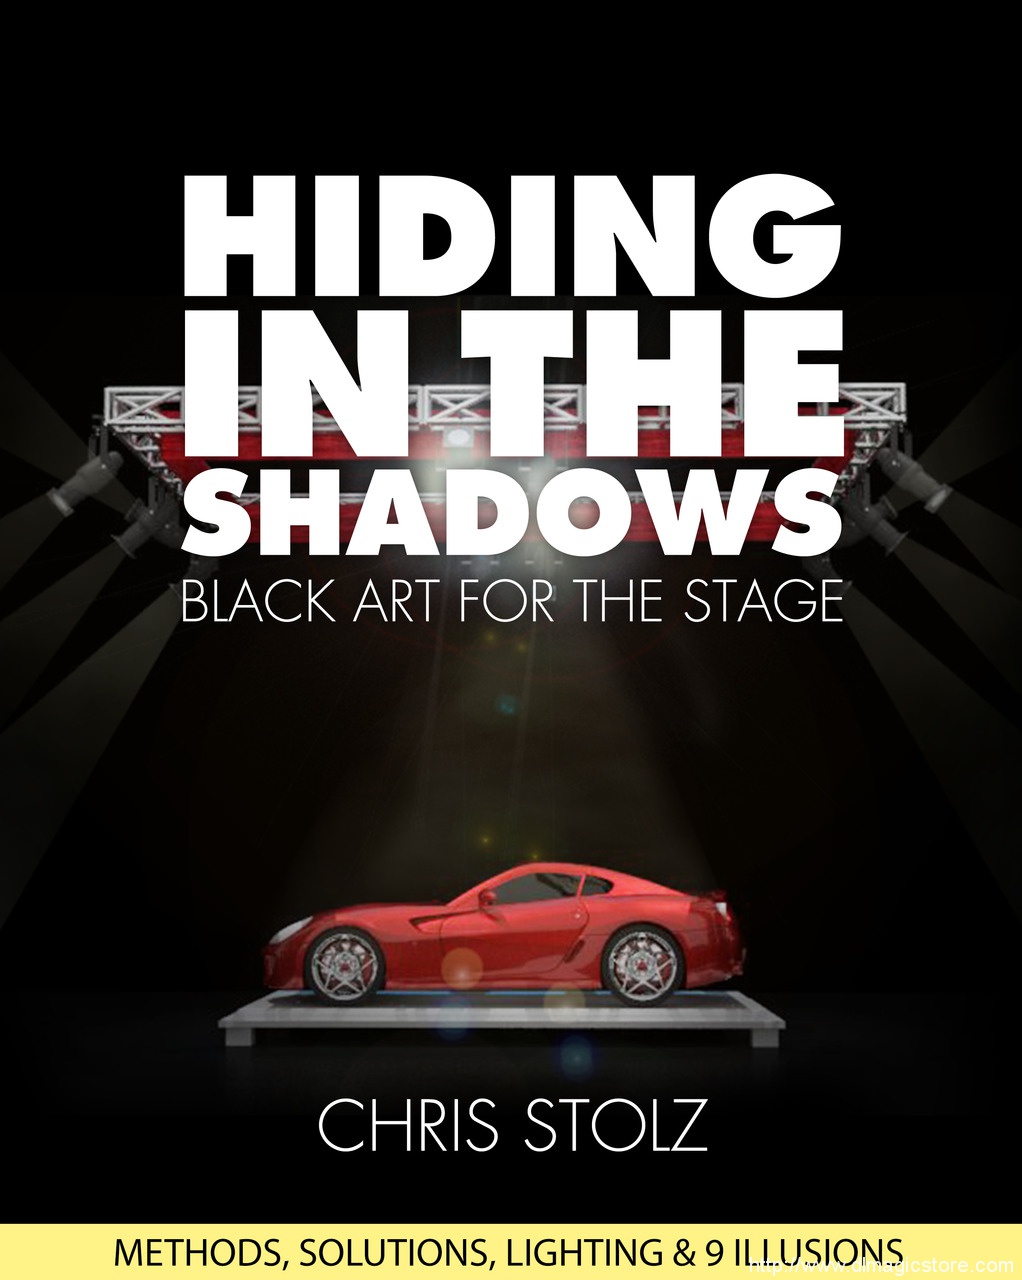 Hiding In The Shadows by Chris Stolz